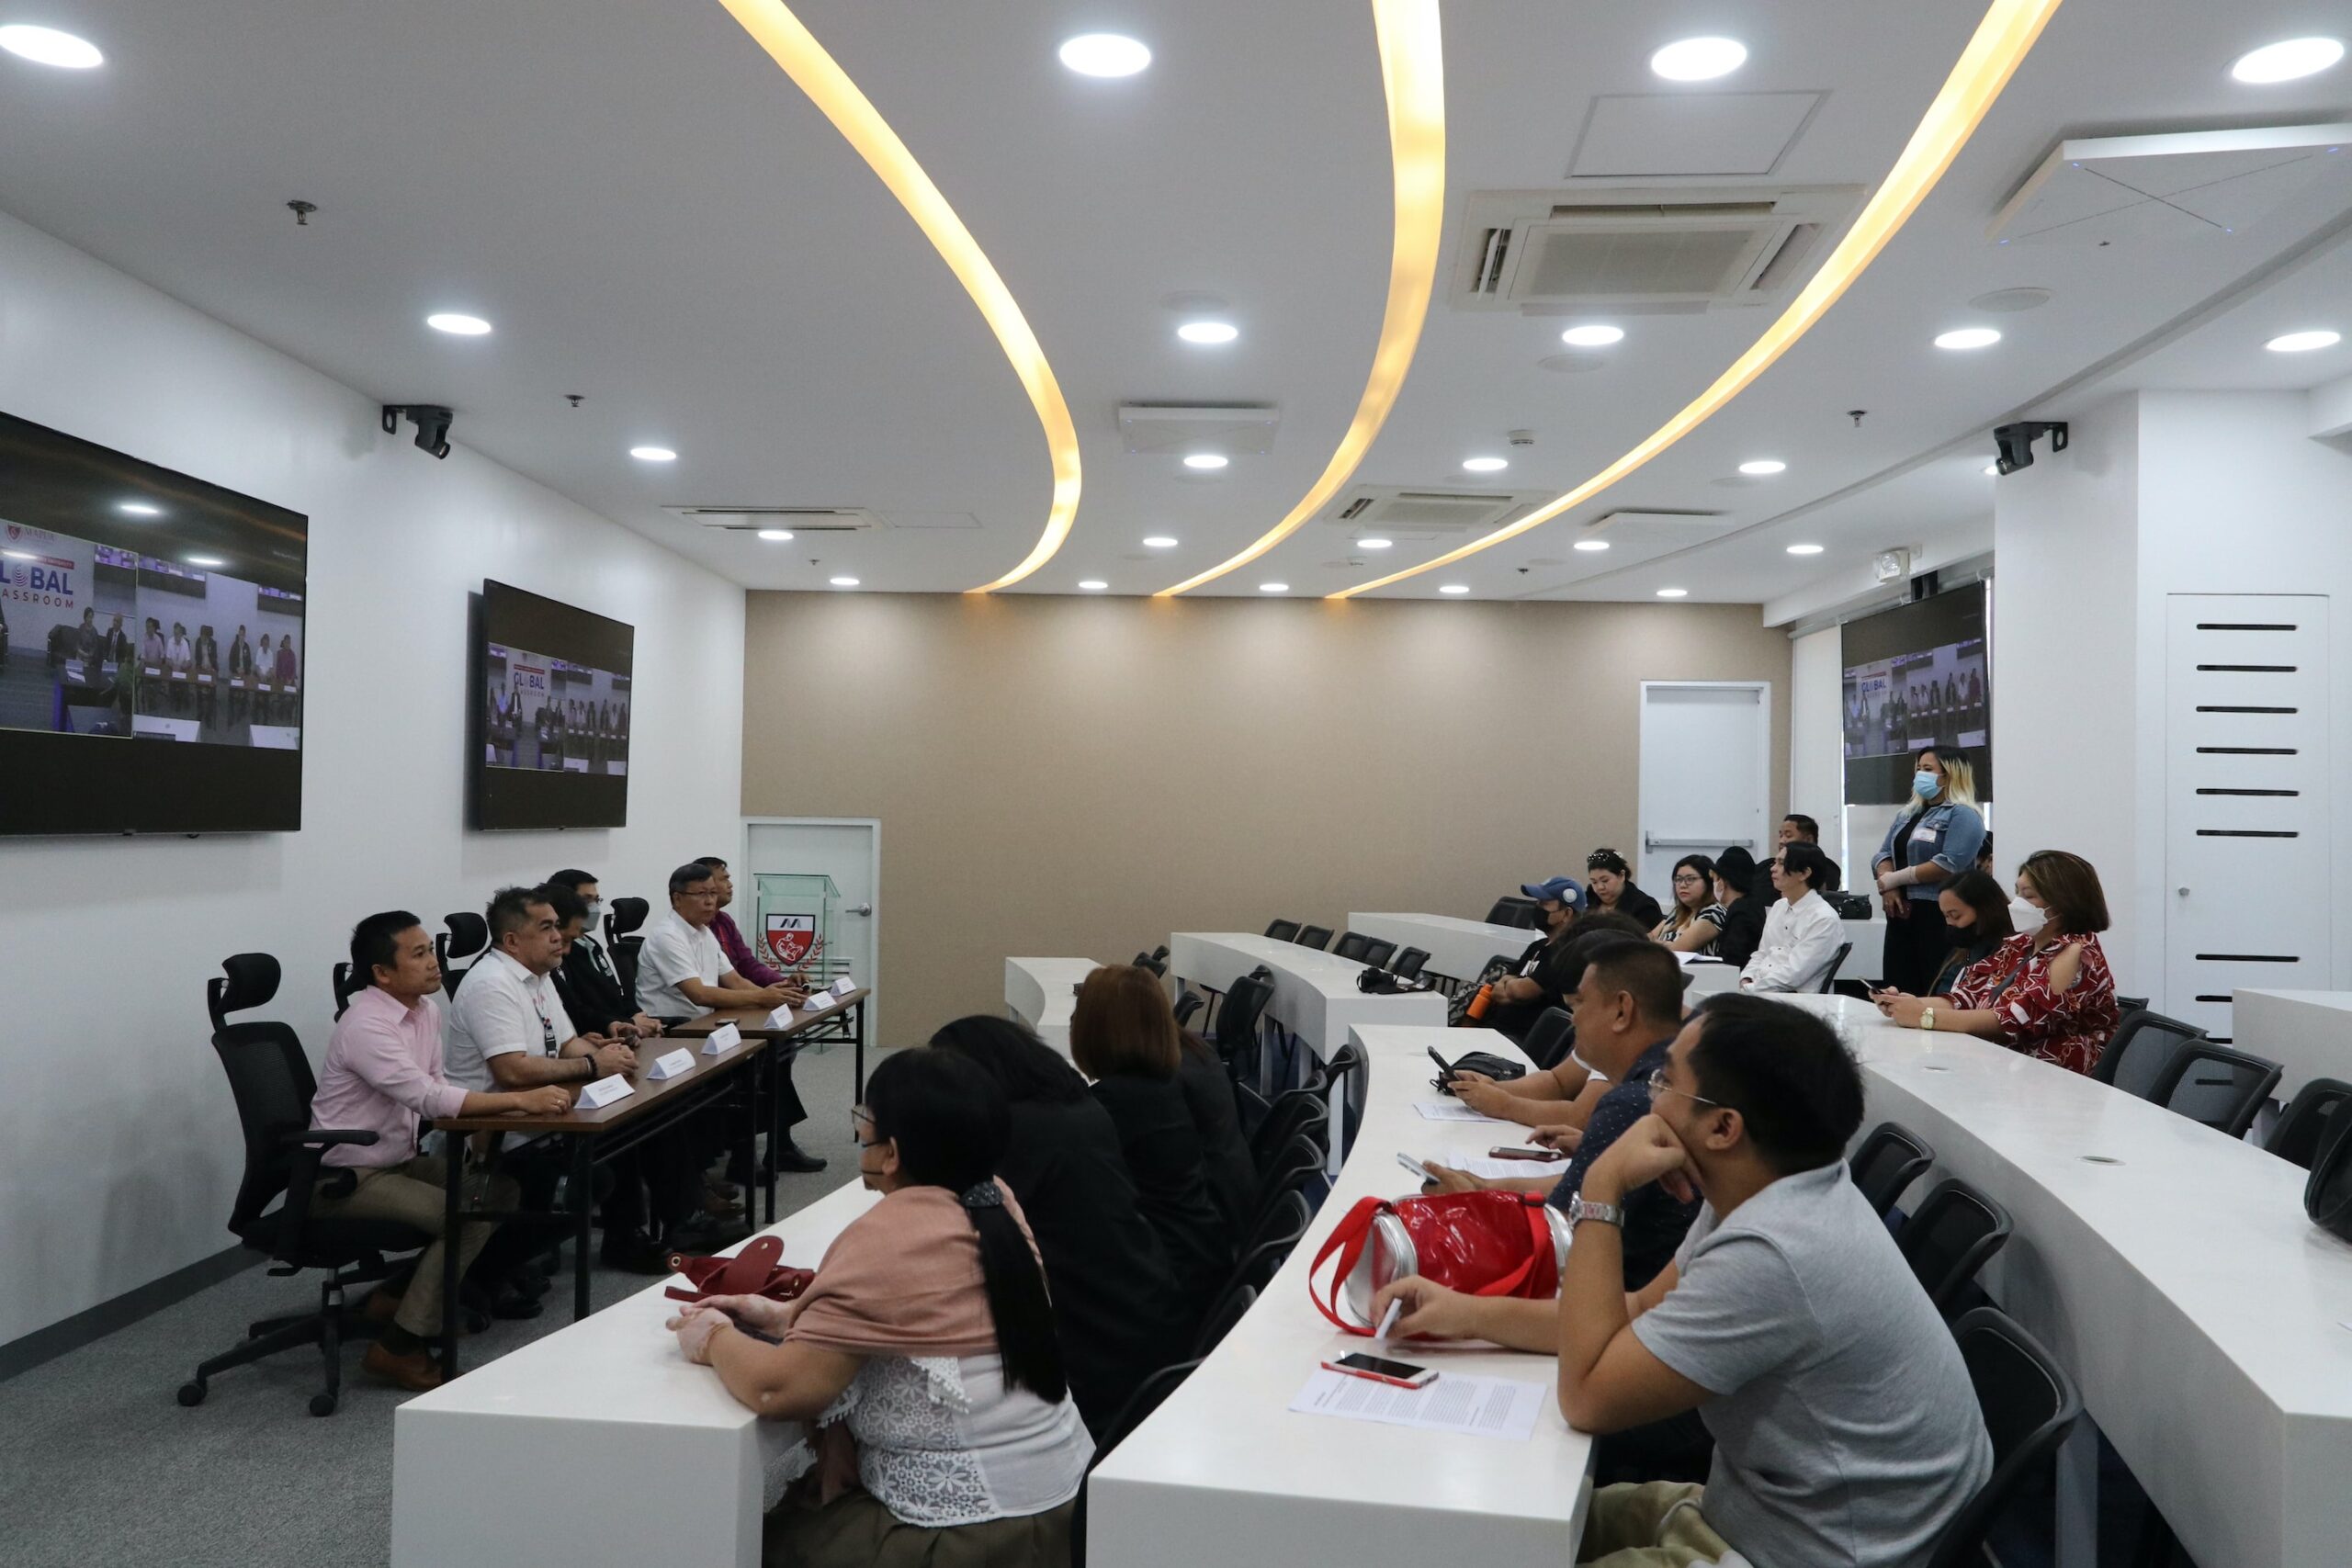 MAPÚA MALAYAN COLLEGES MINDANAO LAUNCHES GLOBAL CLASSROOMS CONNECTING ITS CAMPUS TO THE WORLD